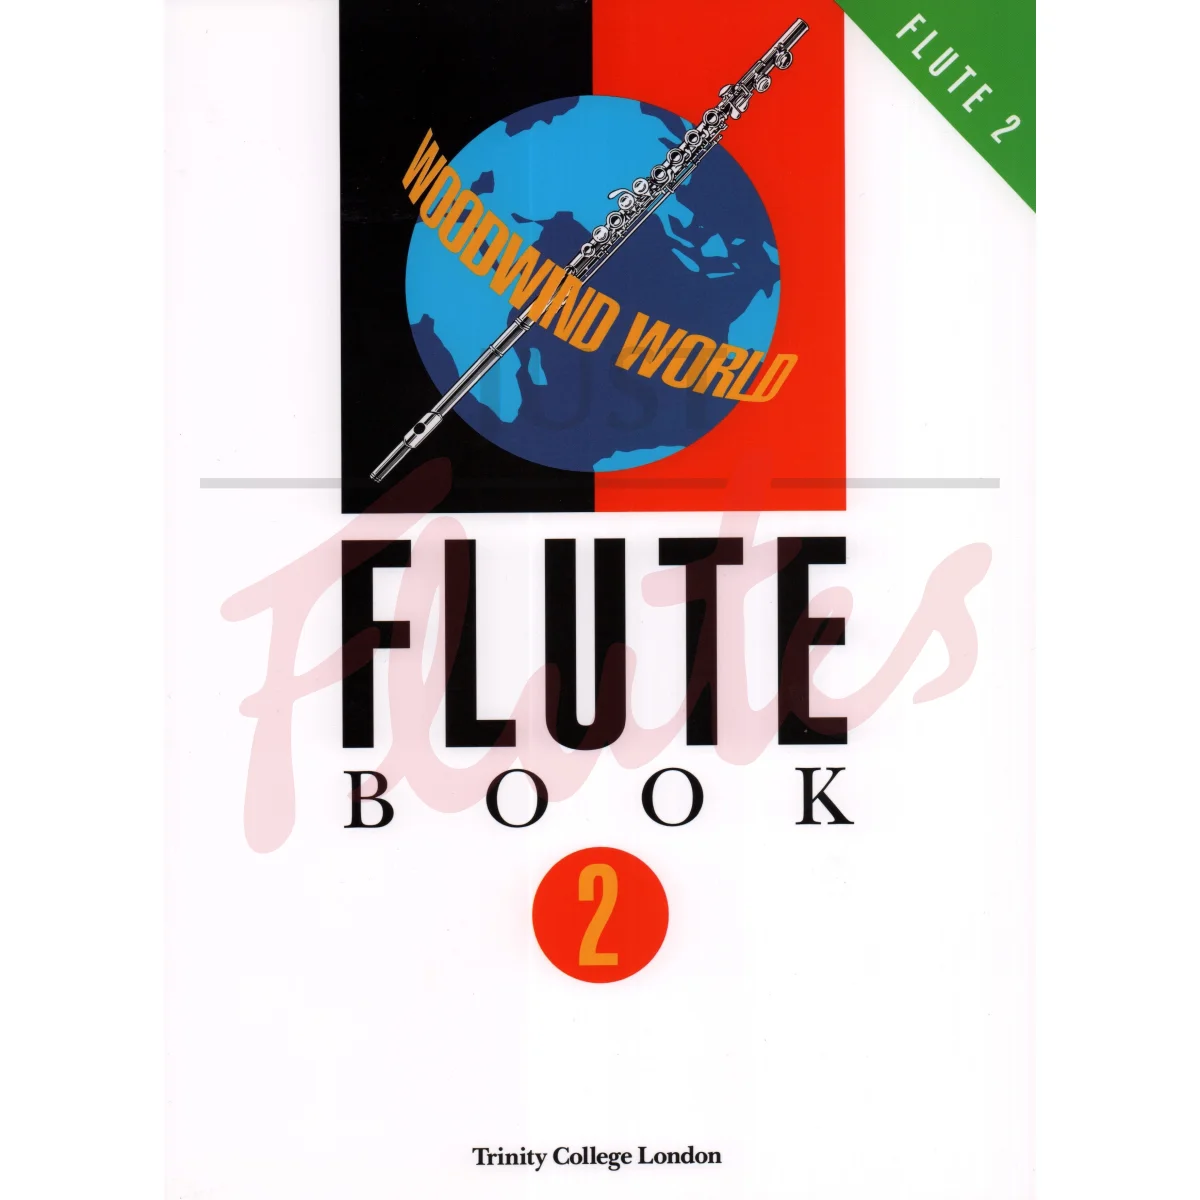 Woodwind World Flute Book 2 (Complete)